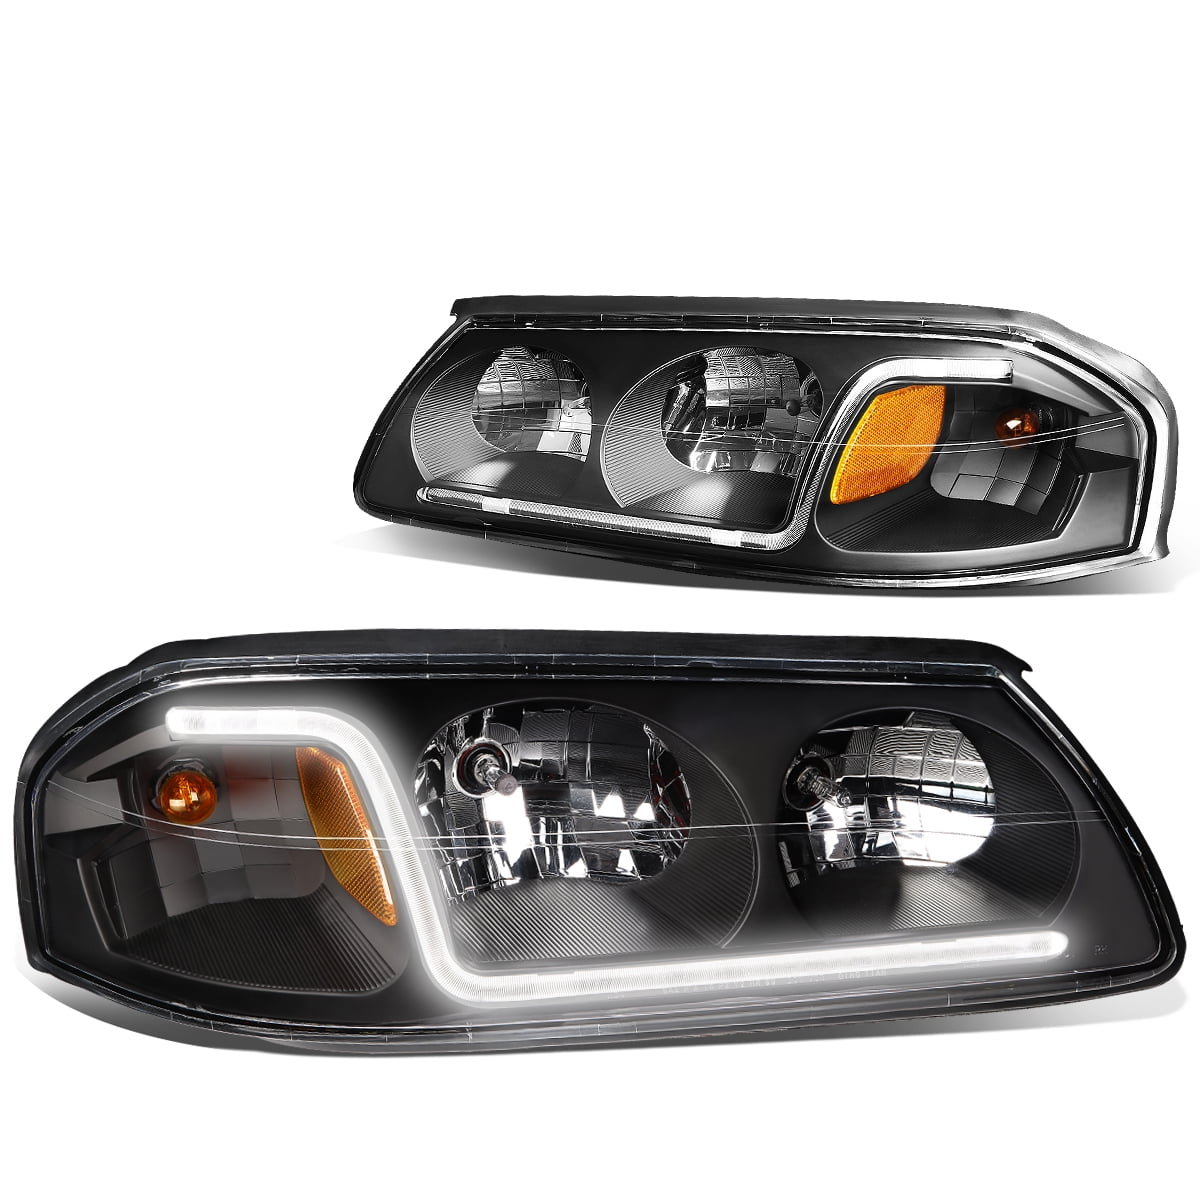 Pair of Black Housing Clear Corner Headlight Assembly Lamps Replacement for Chevy Impala 8th Gen 00-05 